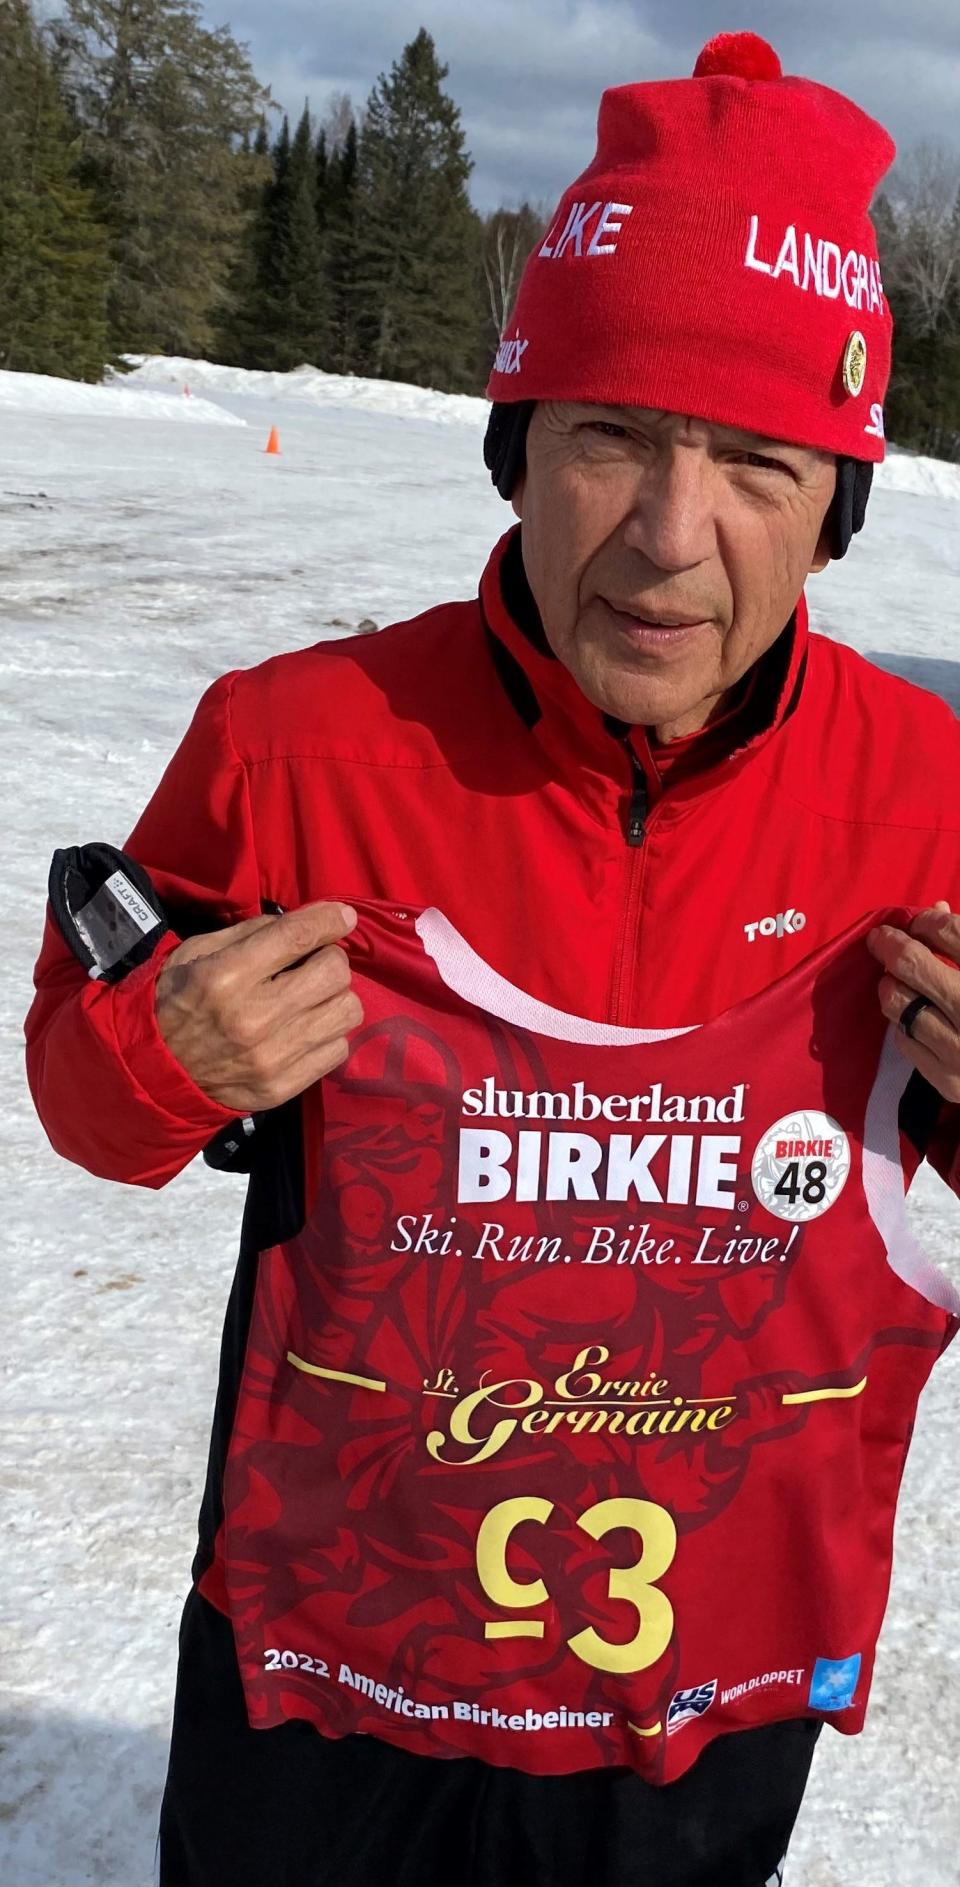 Before the 2022 race, Ernie St. Germaine displays his one-of-a-kind racing bib, designed for him as the only person to have skied every Birkie race since 1973.